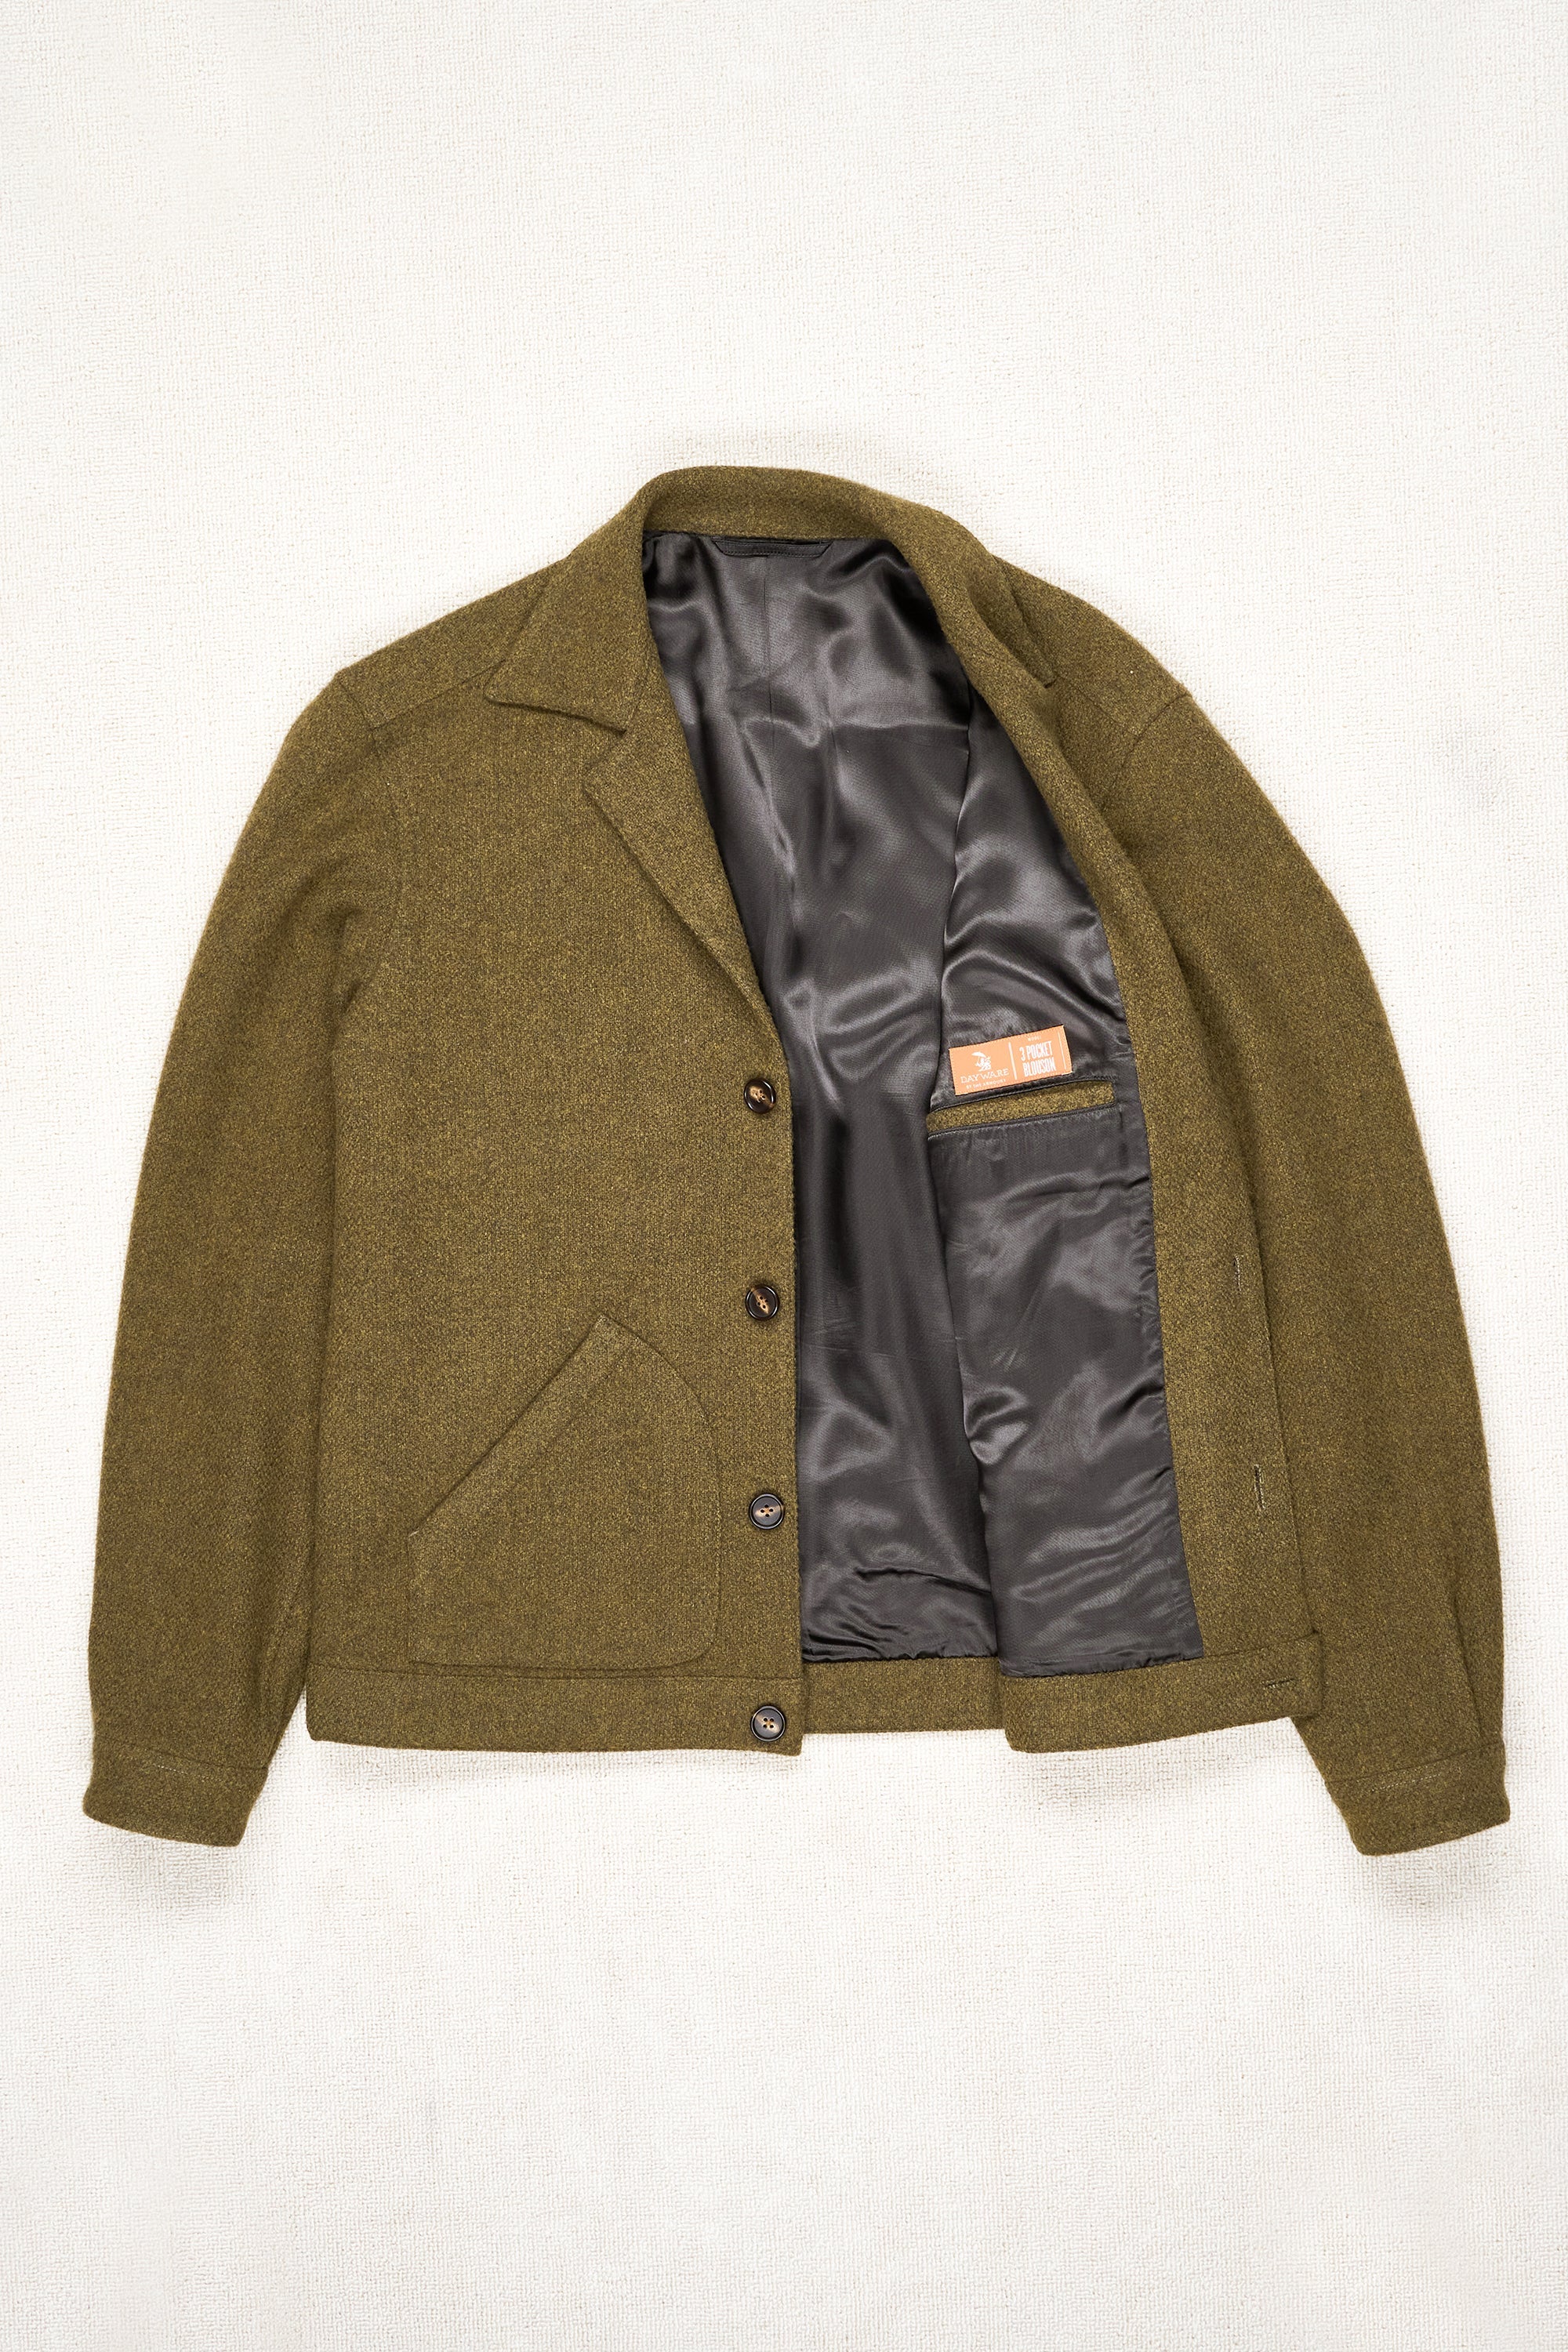 The Armoury Olive Wool 3 Pocket Blouson